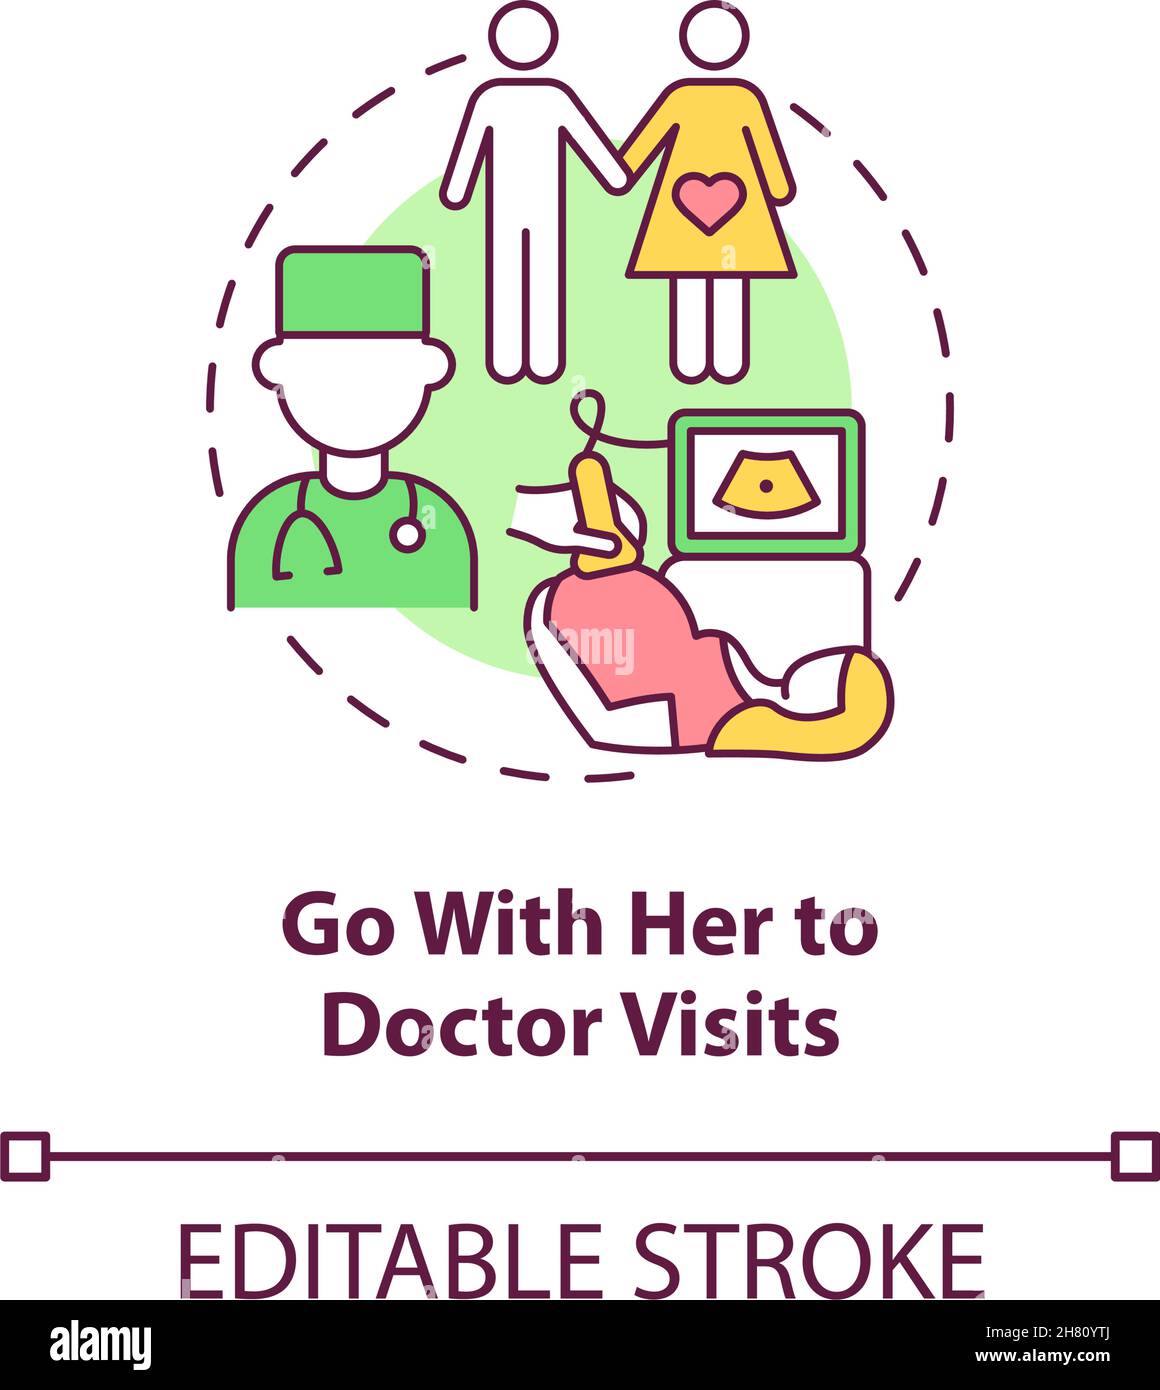 Go with her to doctor visits concept icon Stock Vector